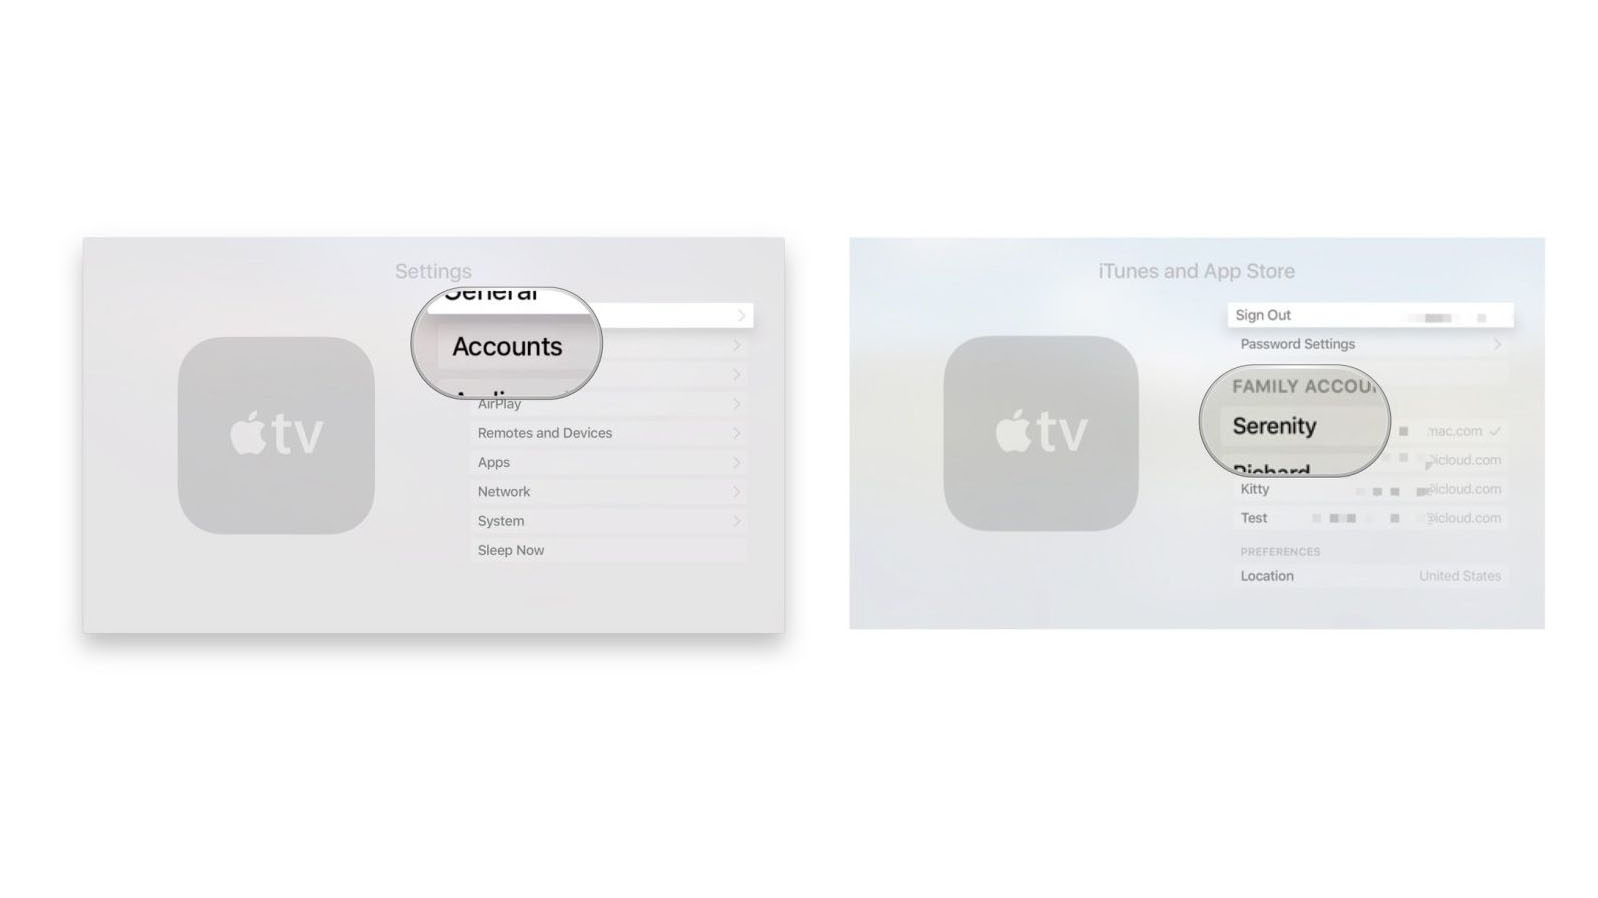 Apple TV settings screengrab to set up multiple accounts on your Apple TV